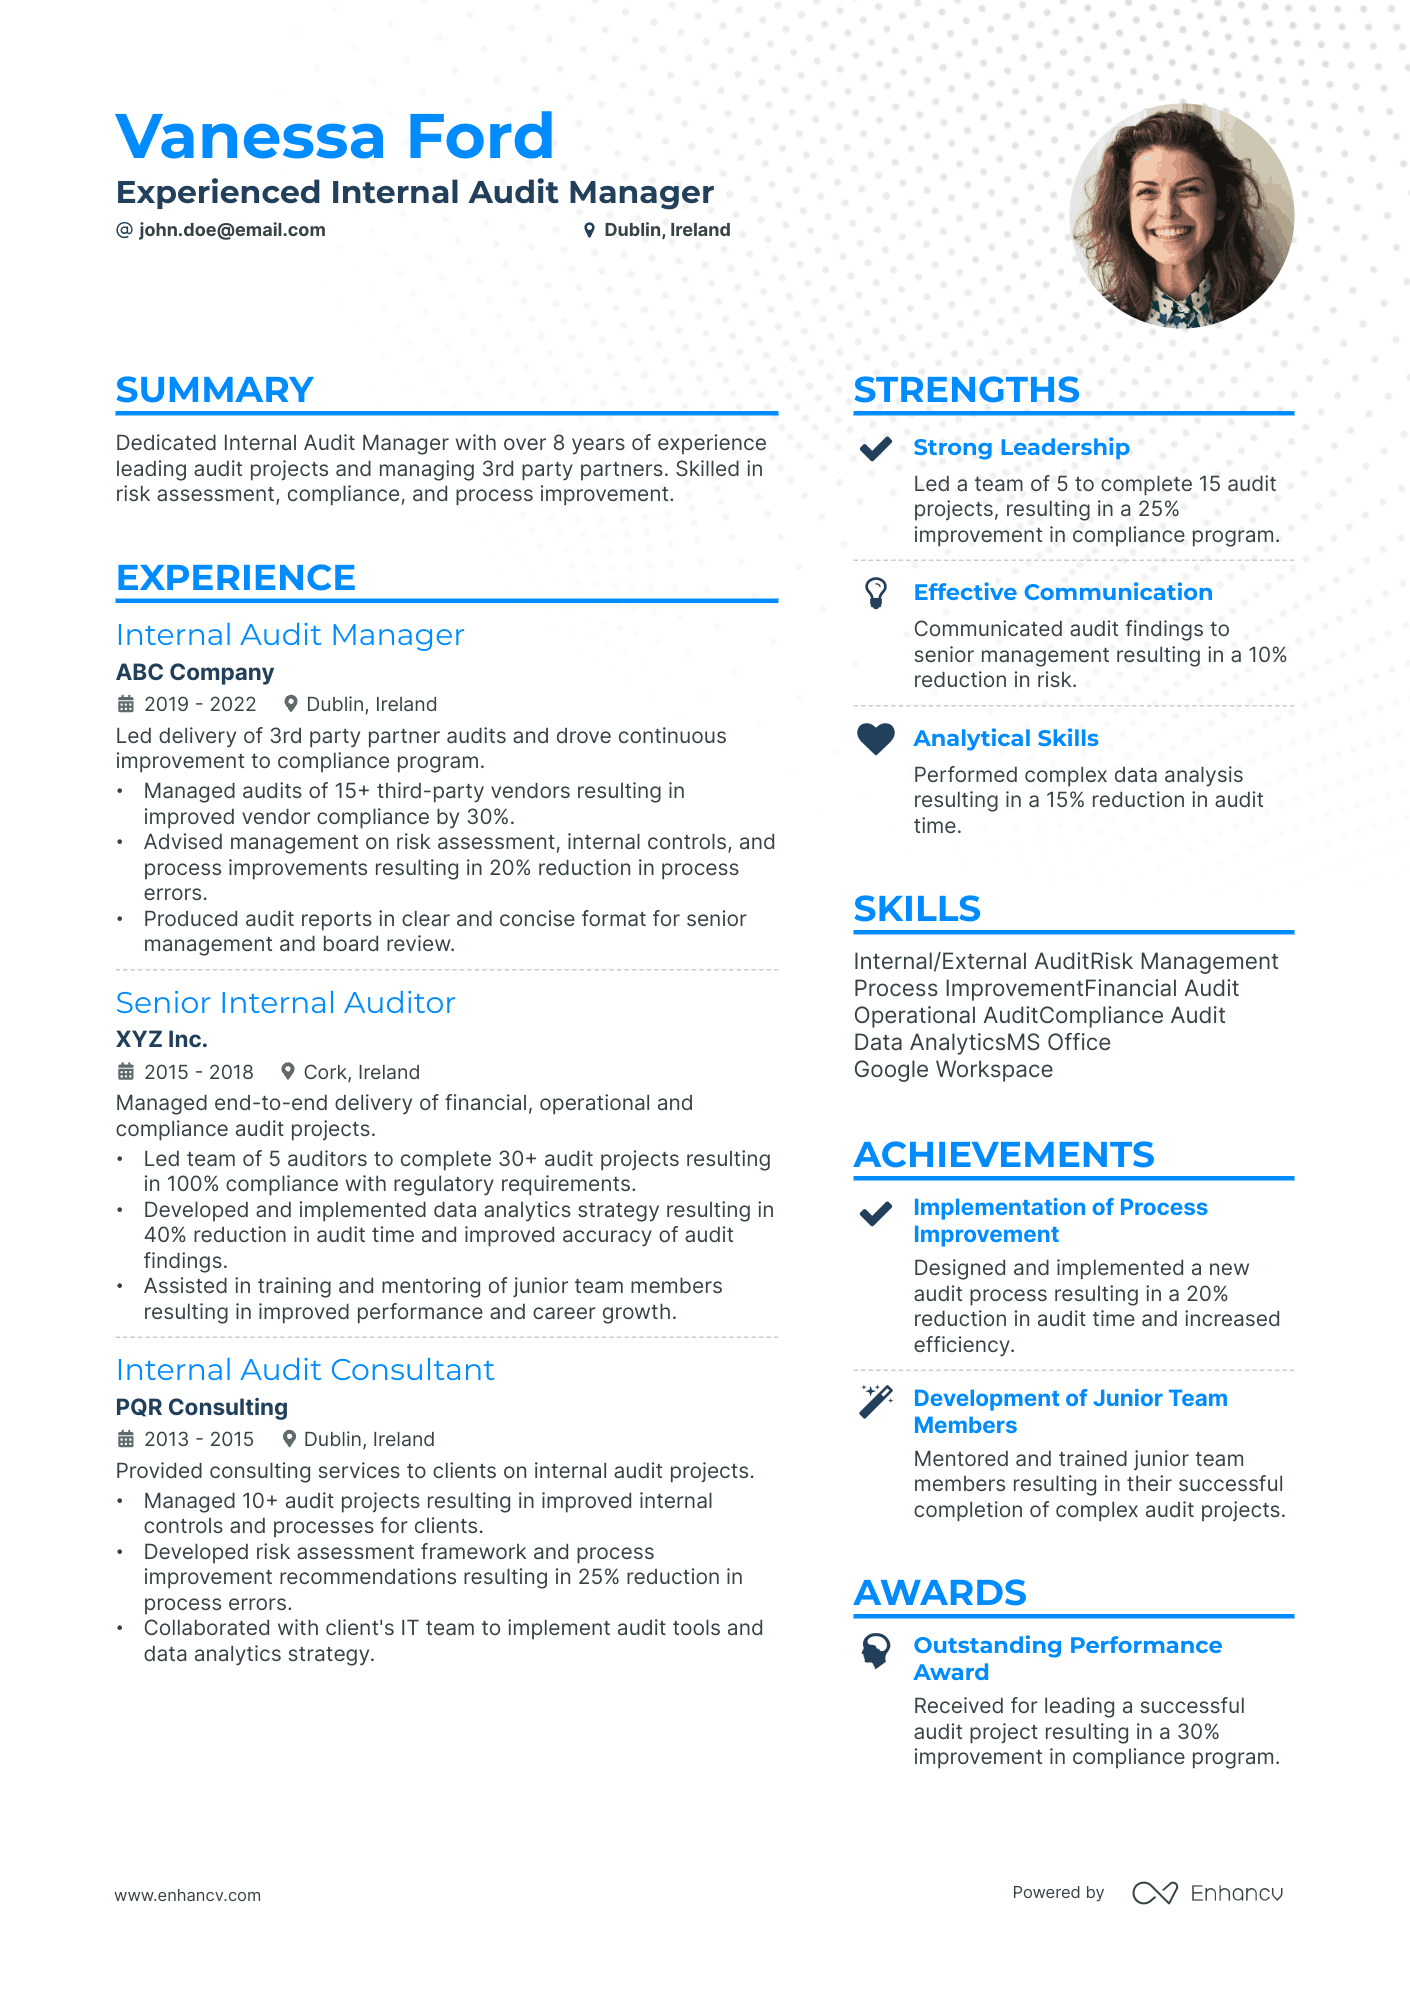 Internal Audit Manager resume example